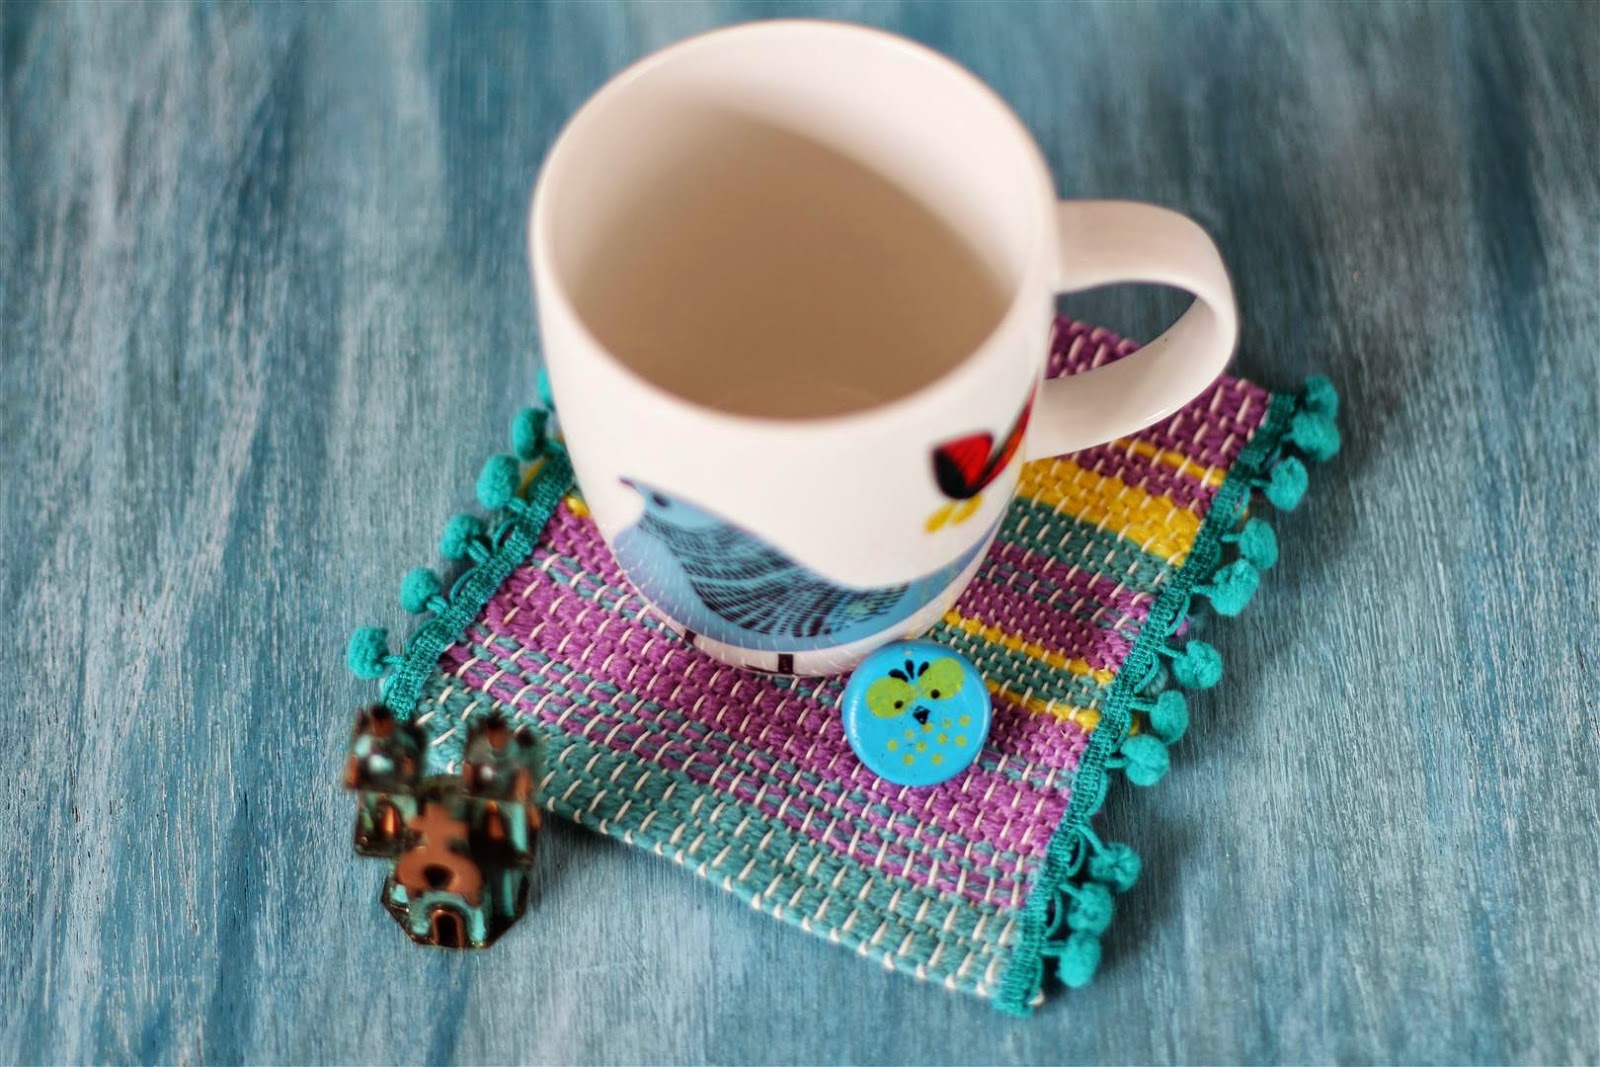 DIY woven loom mat coaster with pompoms